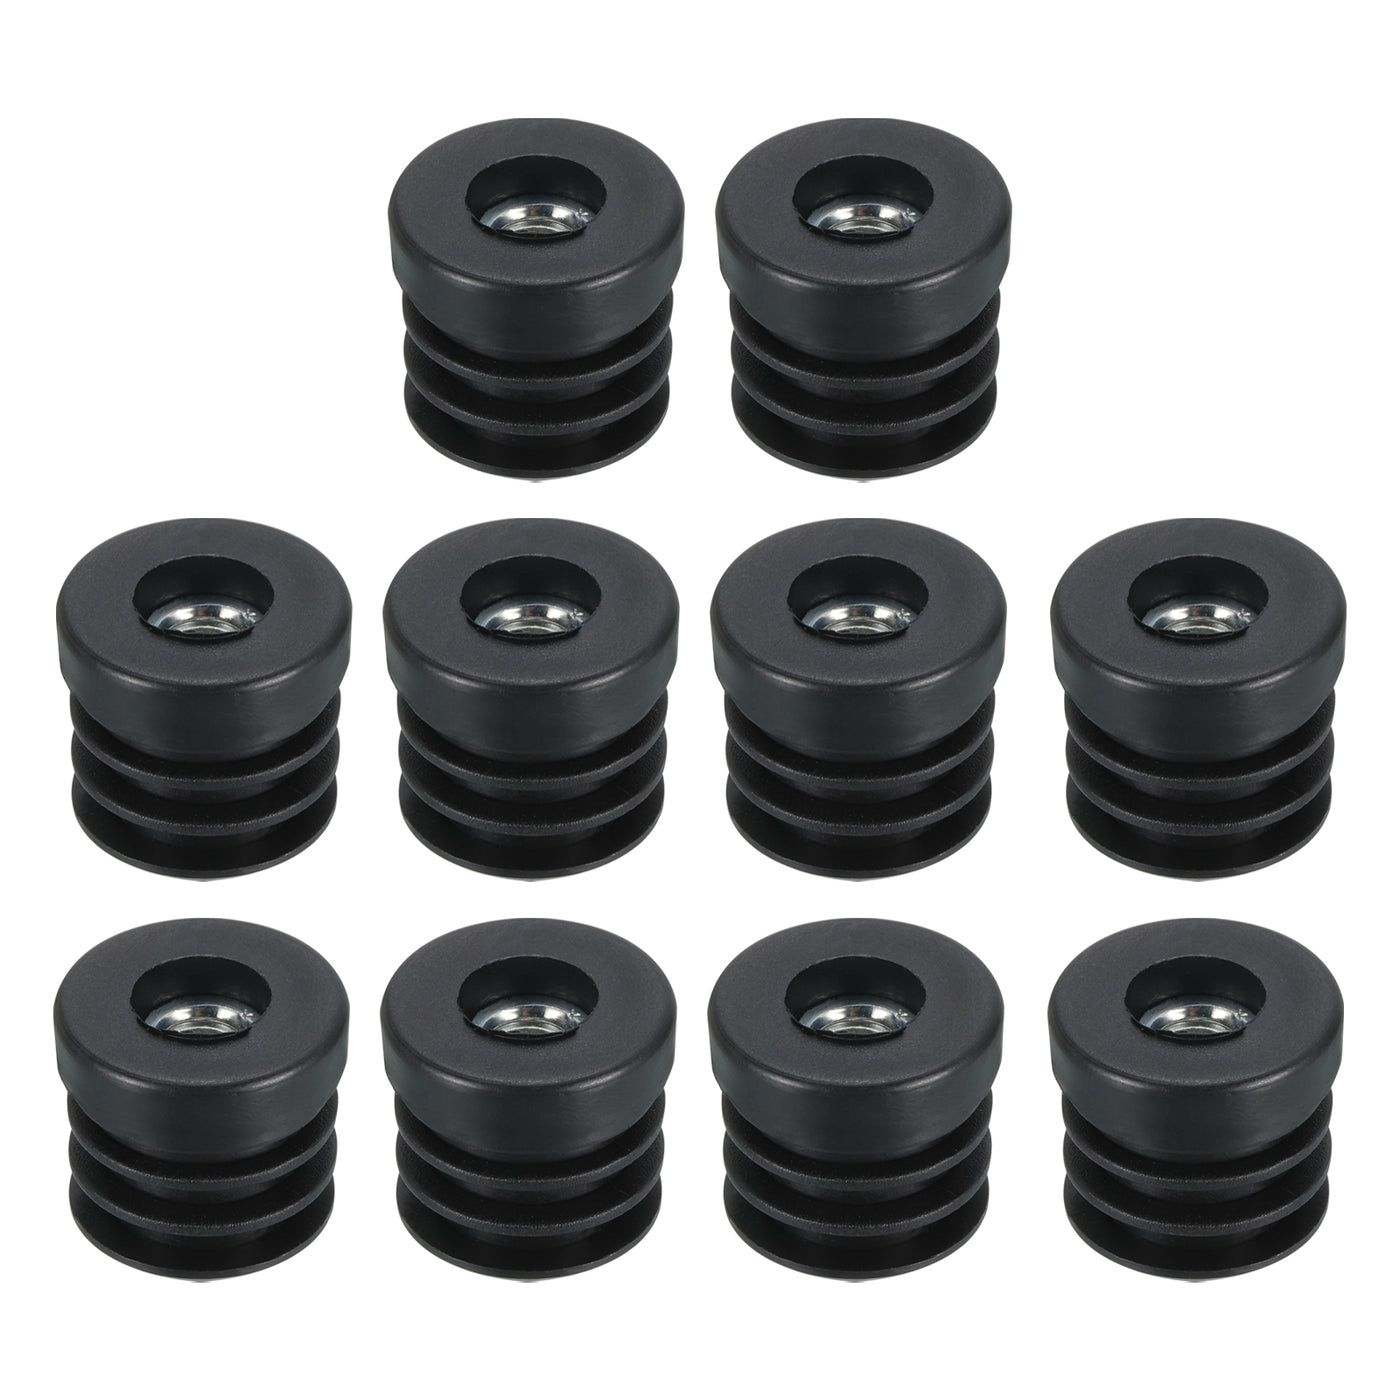 uxcell Uxcell 10Pcs Caster Insert with Thread, 25mm/0.98" M8 Thread for Furniture